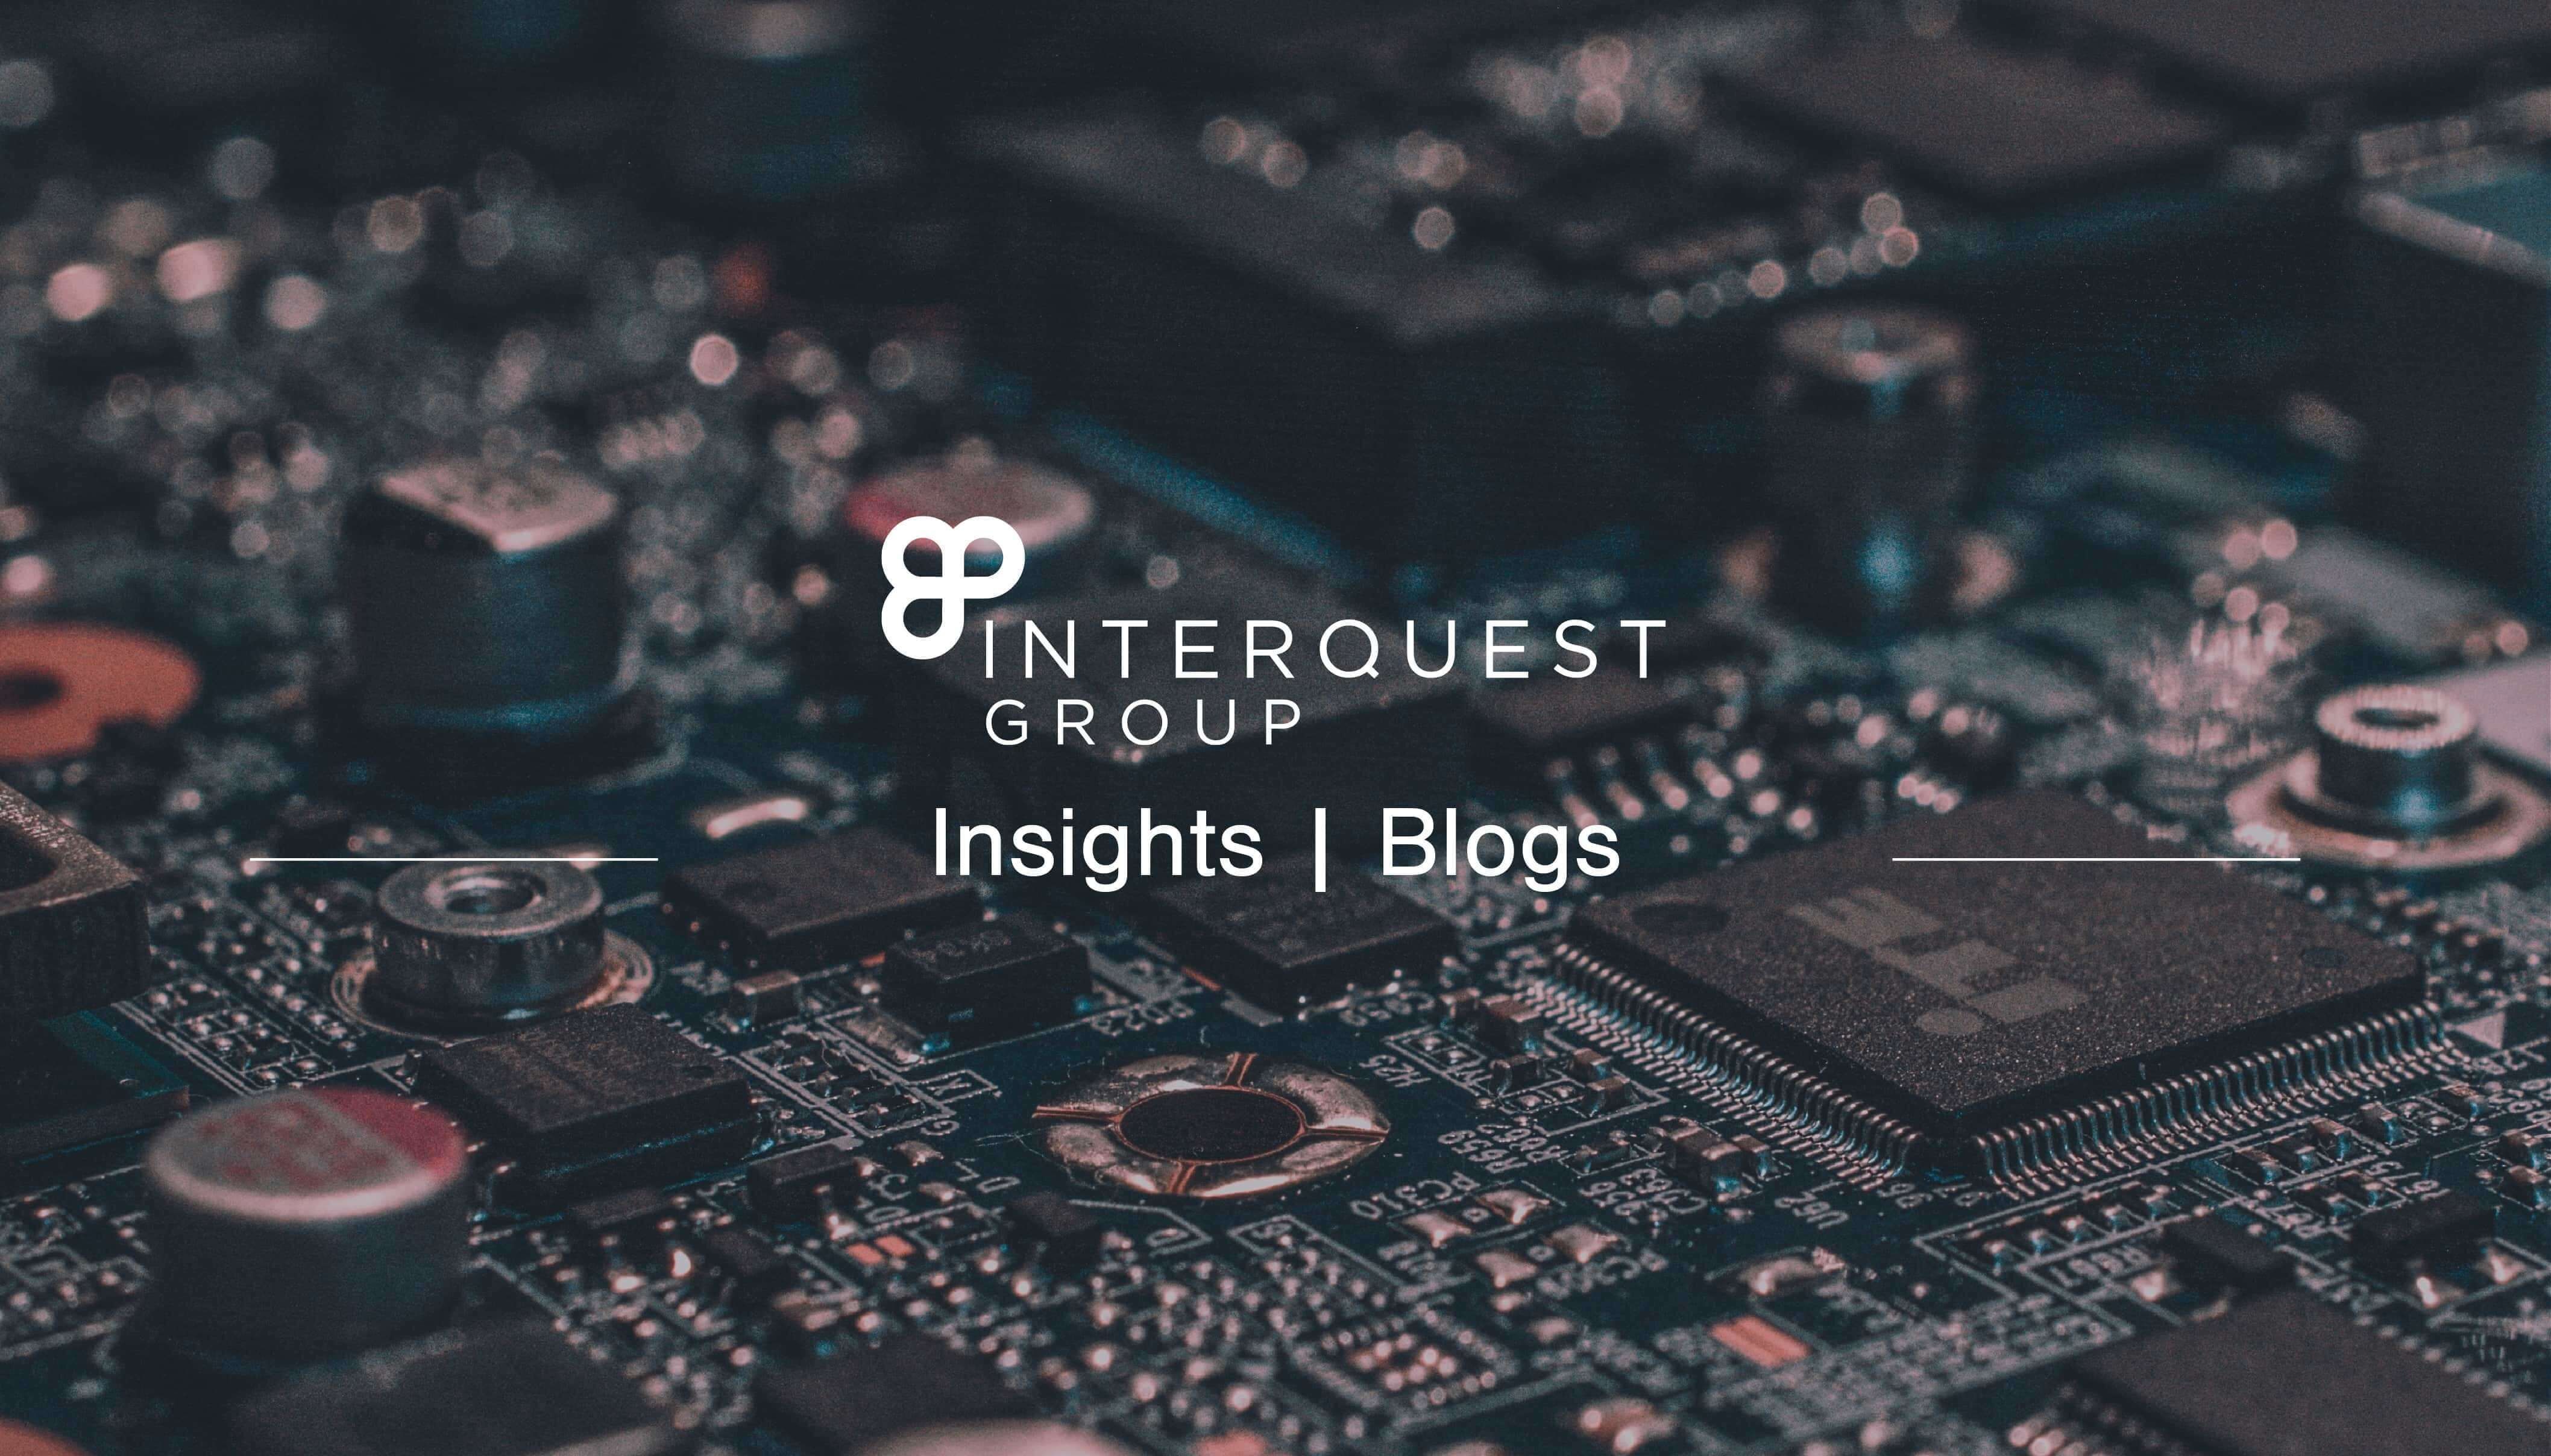 InterQuest Group blog header, close-up photo of a circuit-board as the background